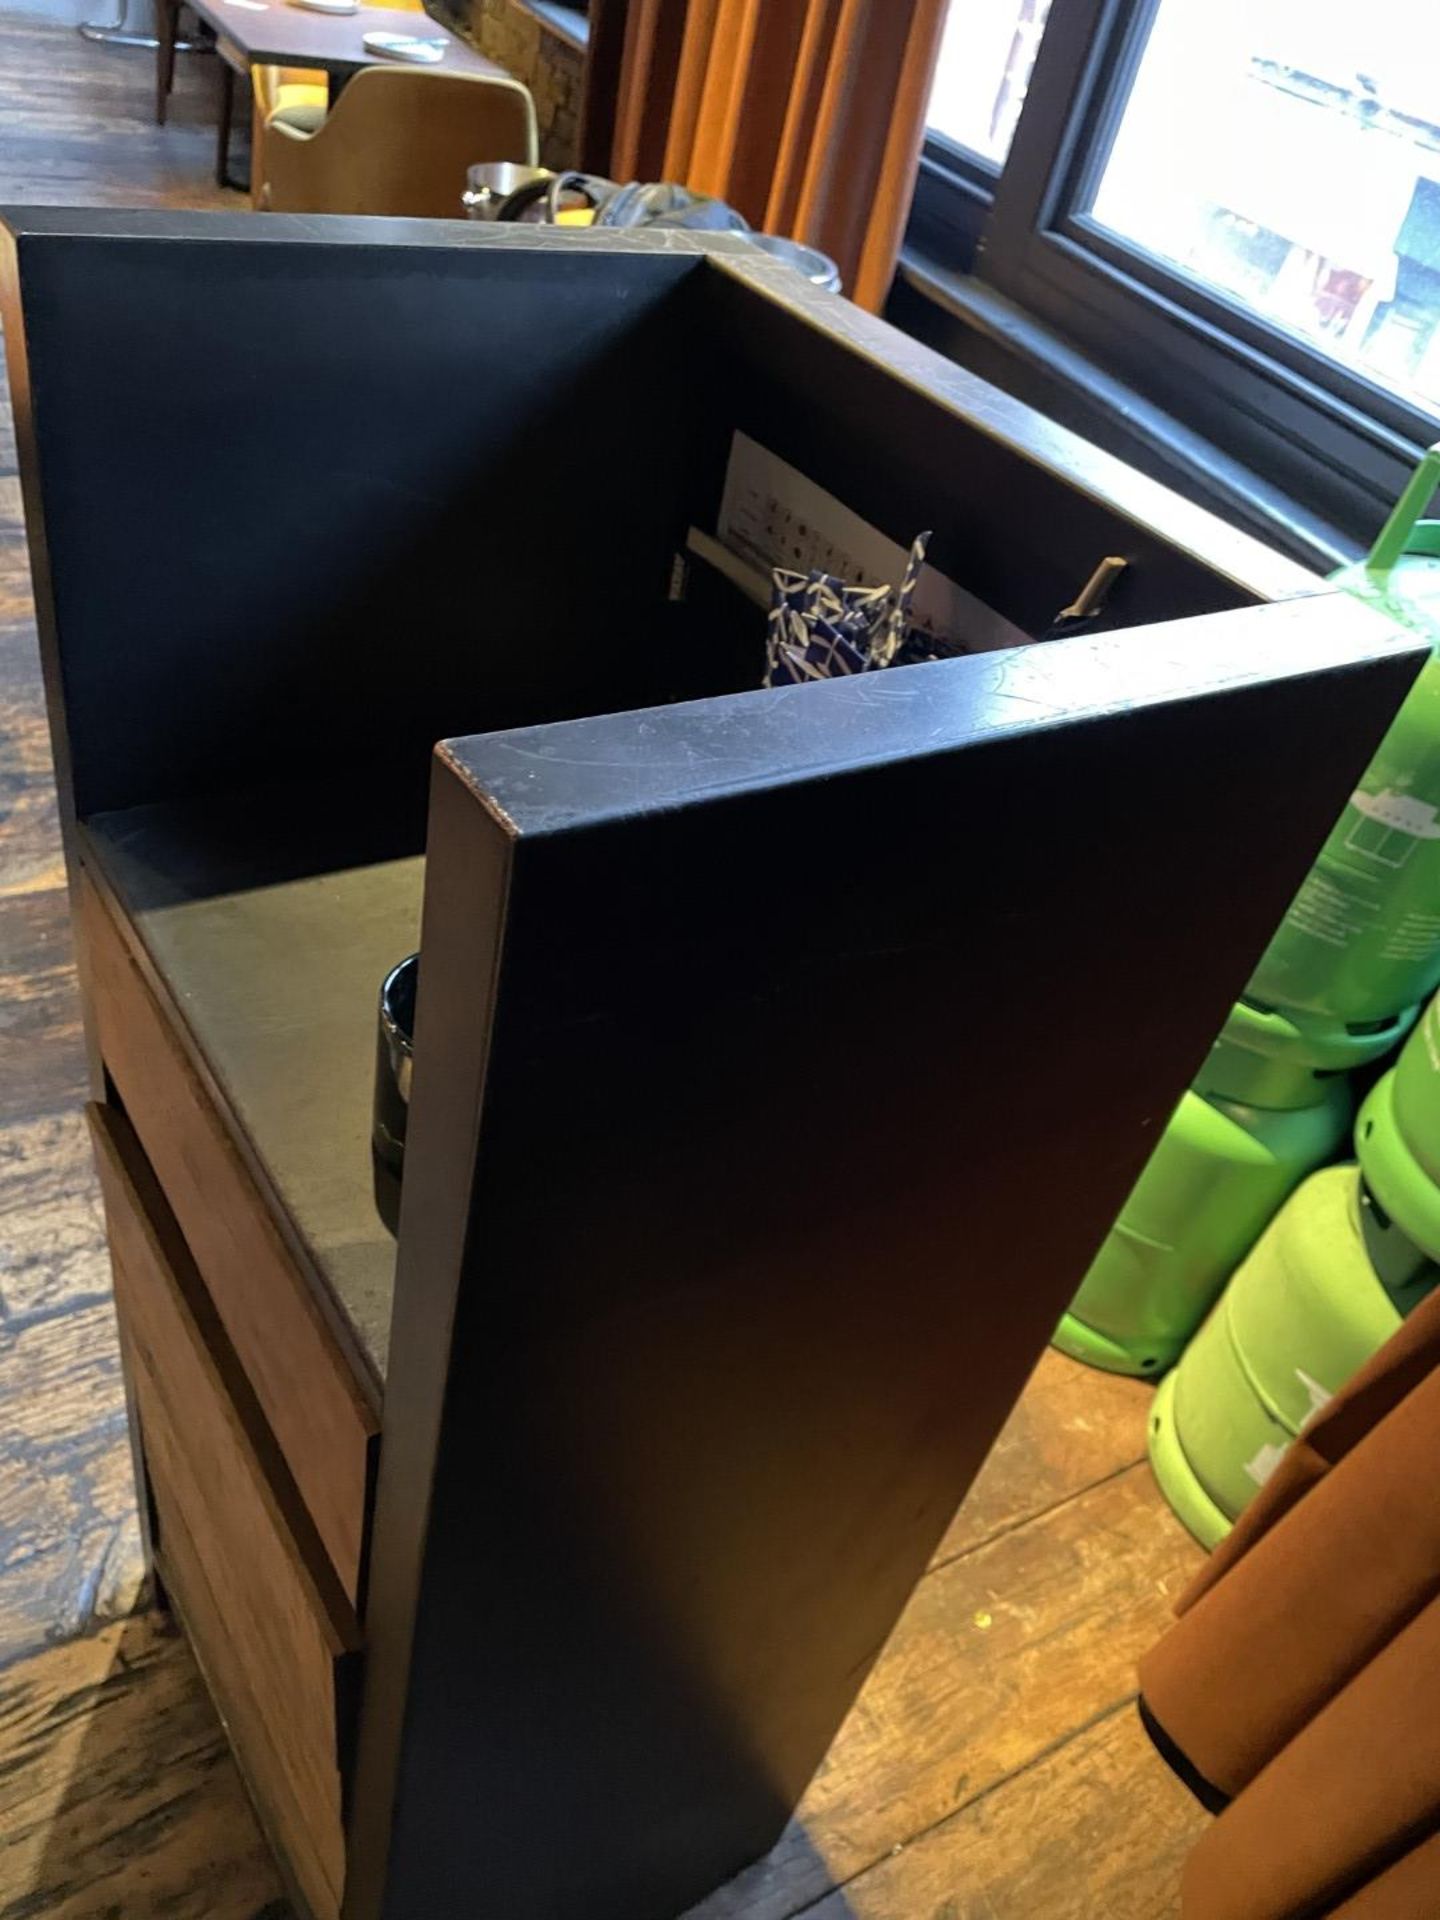 1 x Restaurant Meet and Greet Station Featuring a Black Metal Construction Rustic With Wood Panels - Image 4 of 10